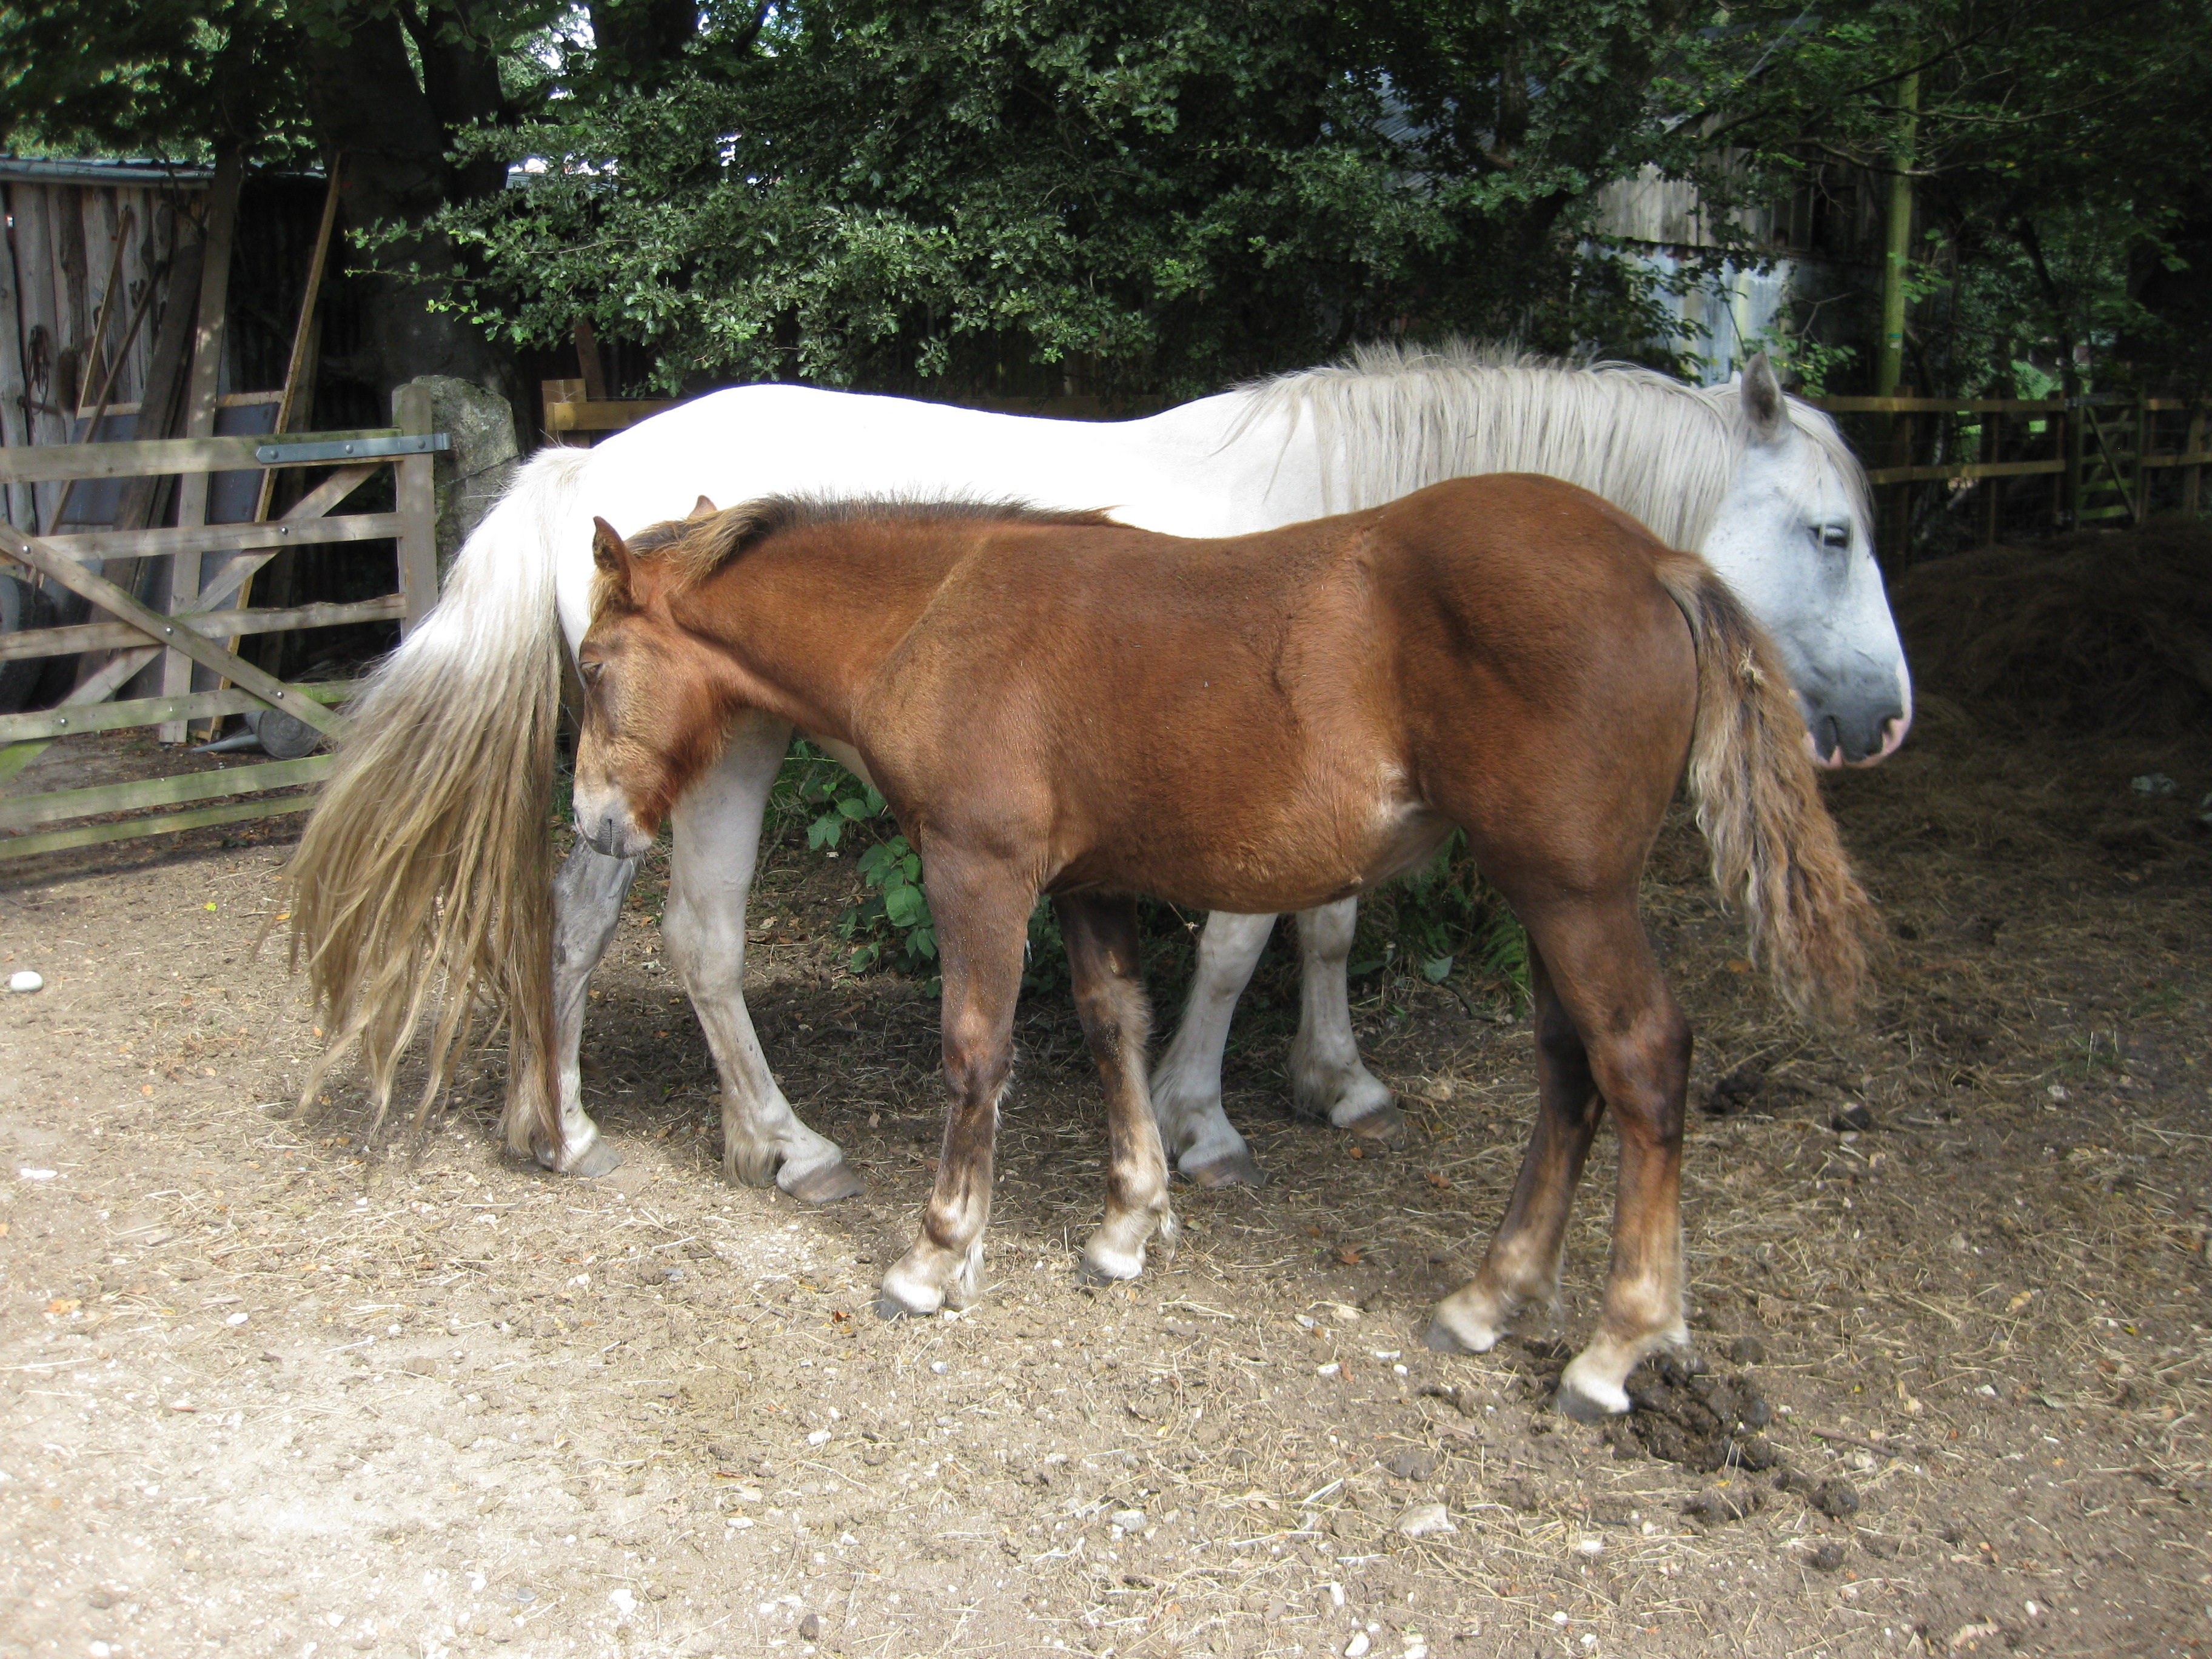 The New Forest ponies should not be stroked or petted, and on no account should they be fed by visitors.